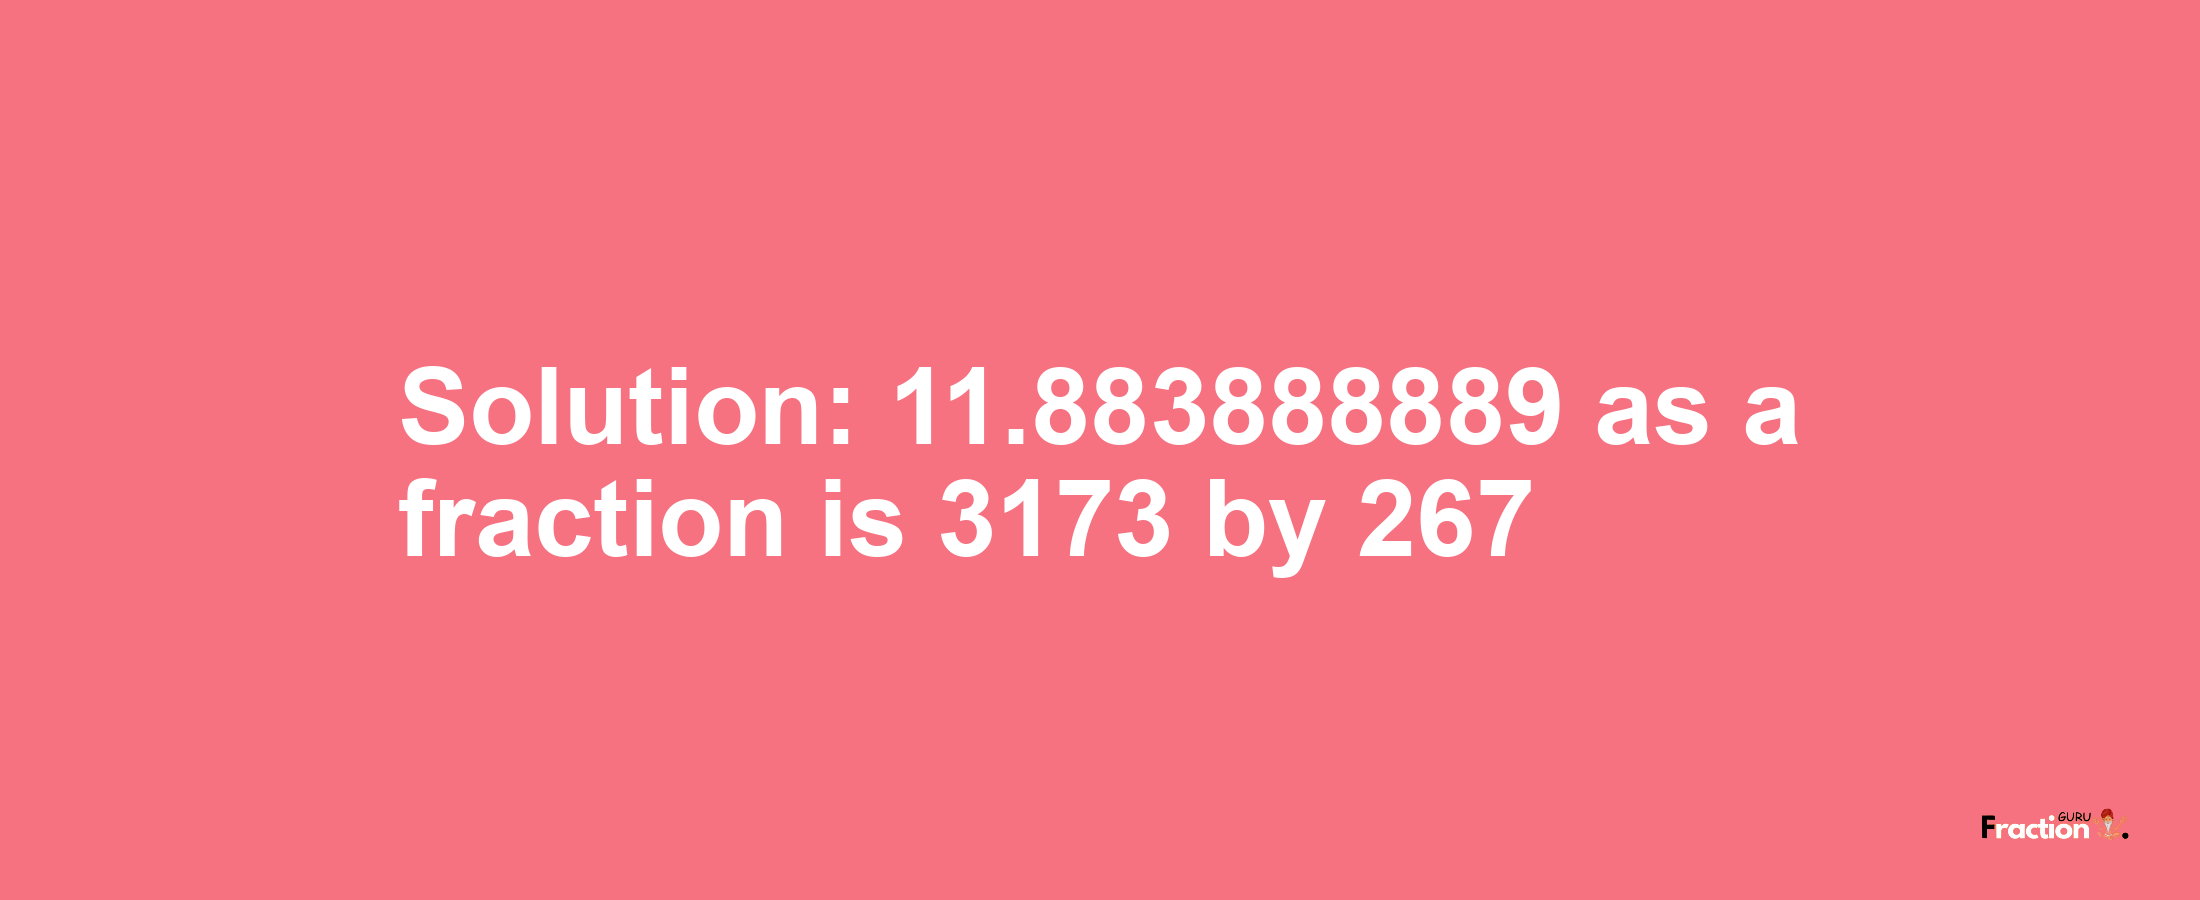 Solution:11.883888889 as a fraction is 3173/267